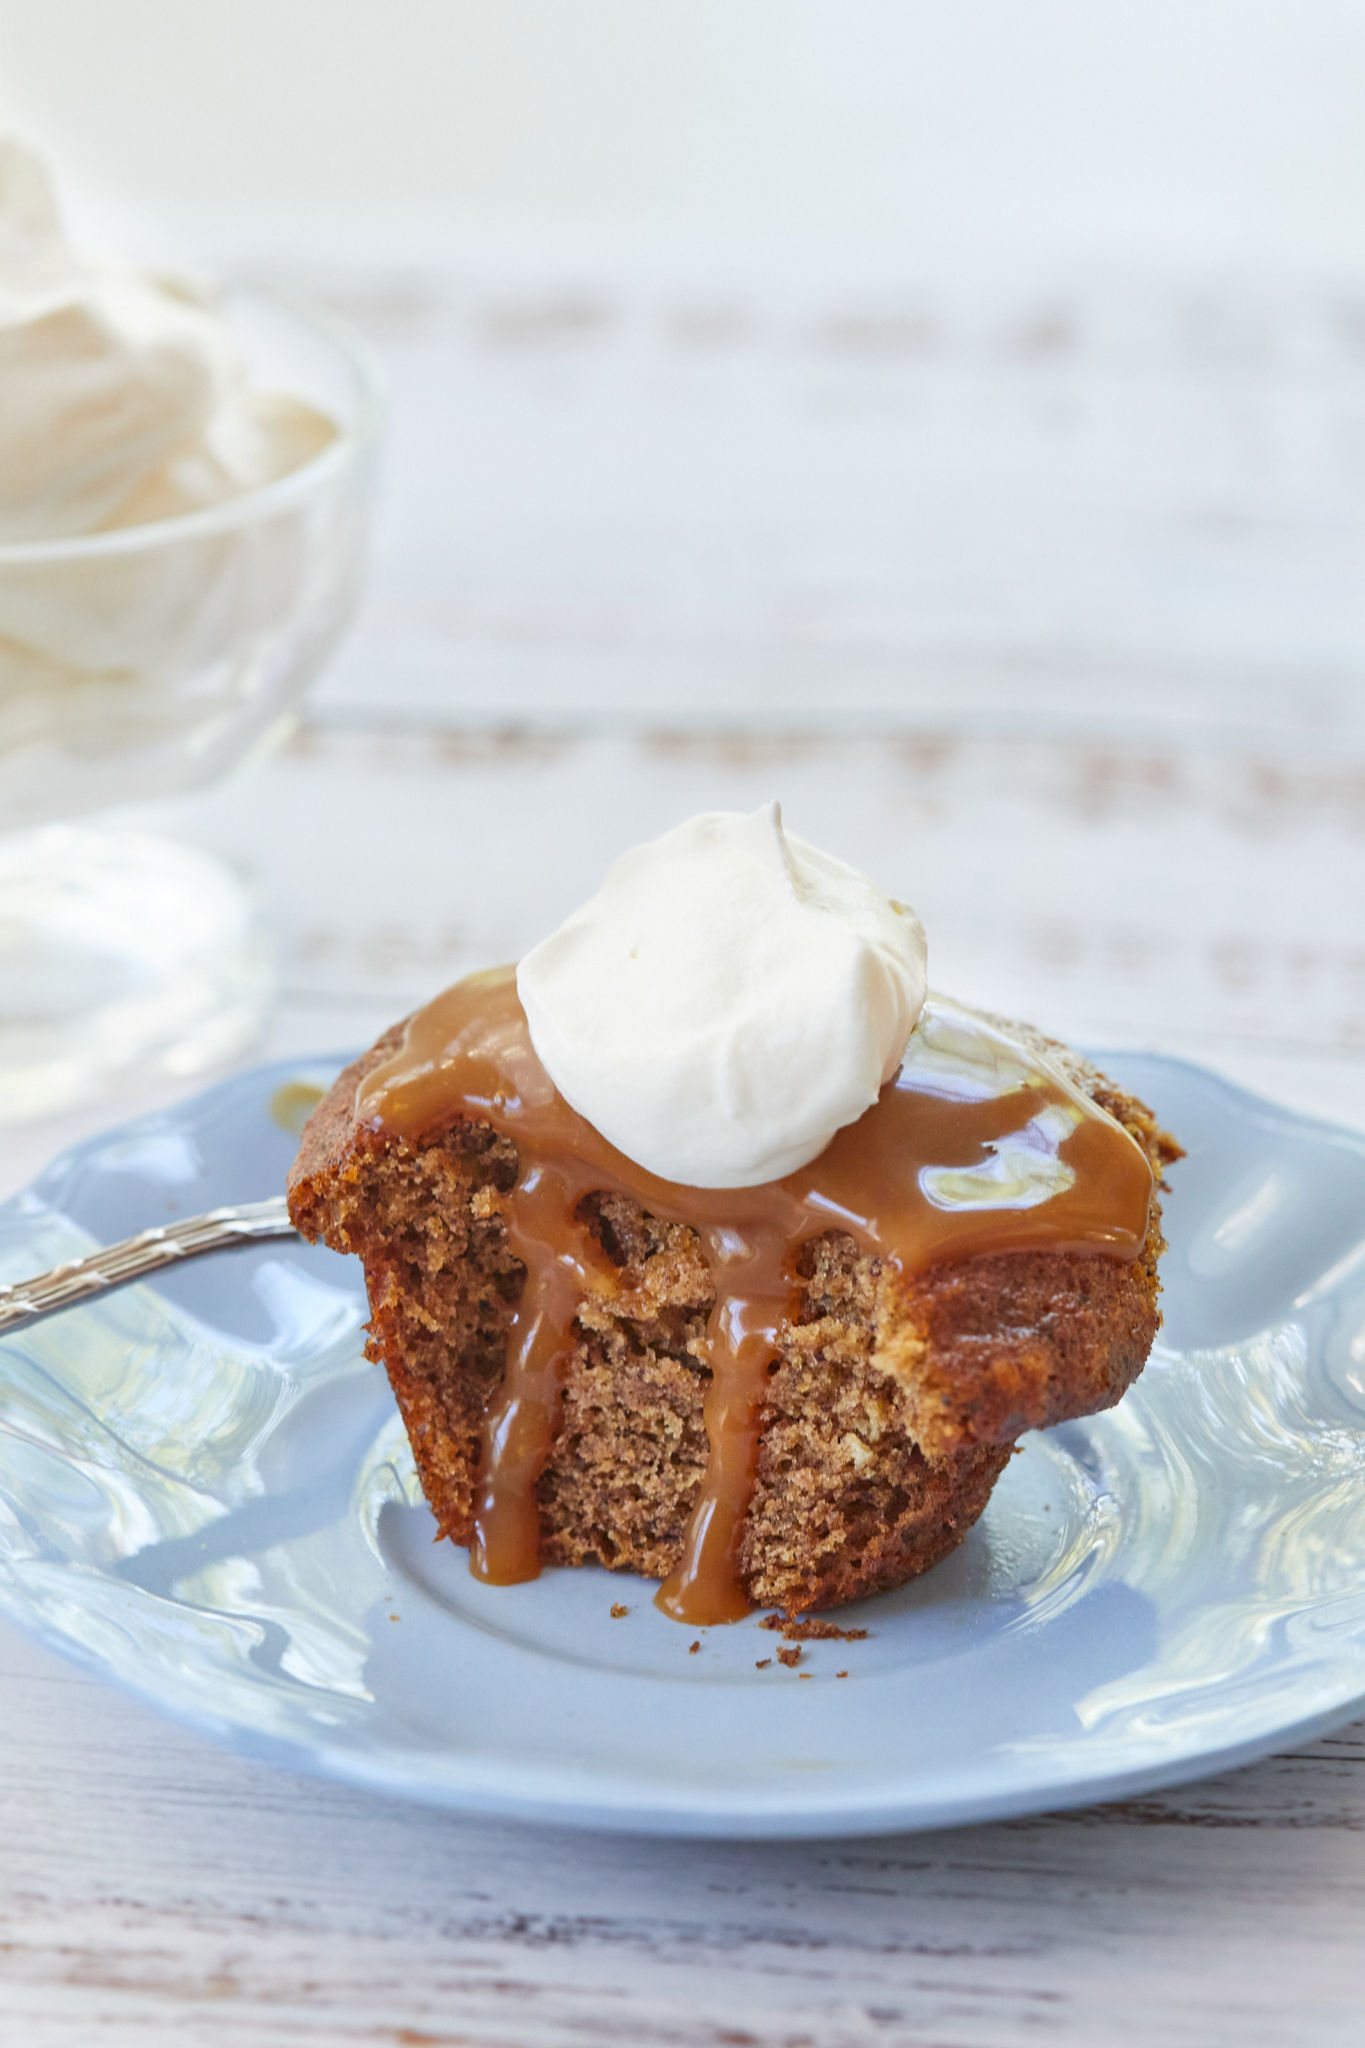 The inside of my English Sticky Toffee Pudding recipe, with salted caramel sauce dripping down the side, and topped with whipped cream.